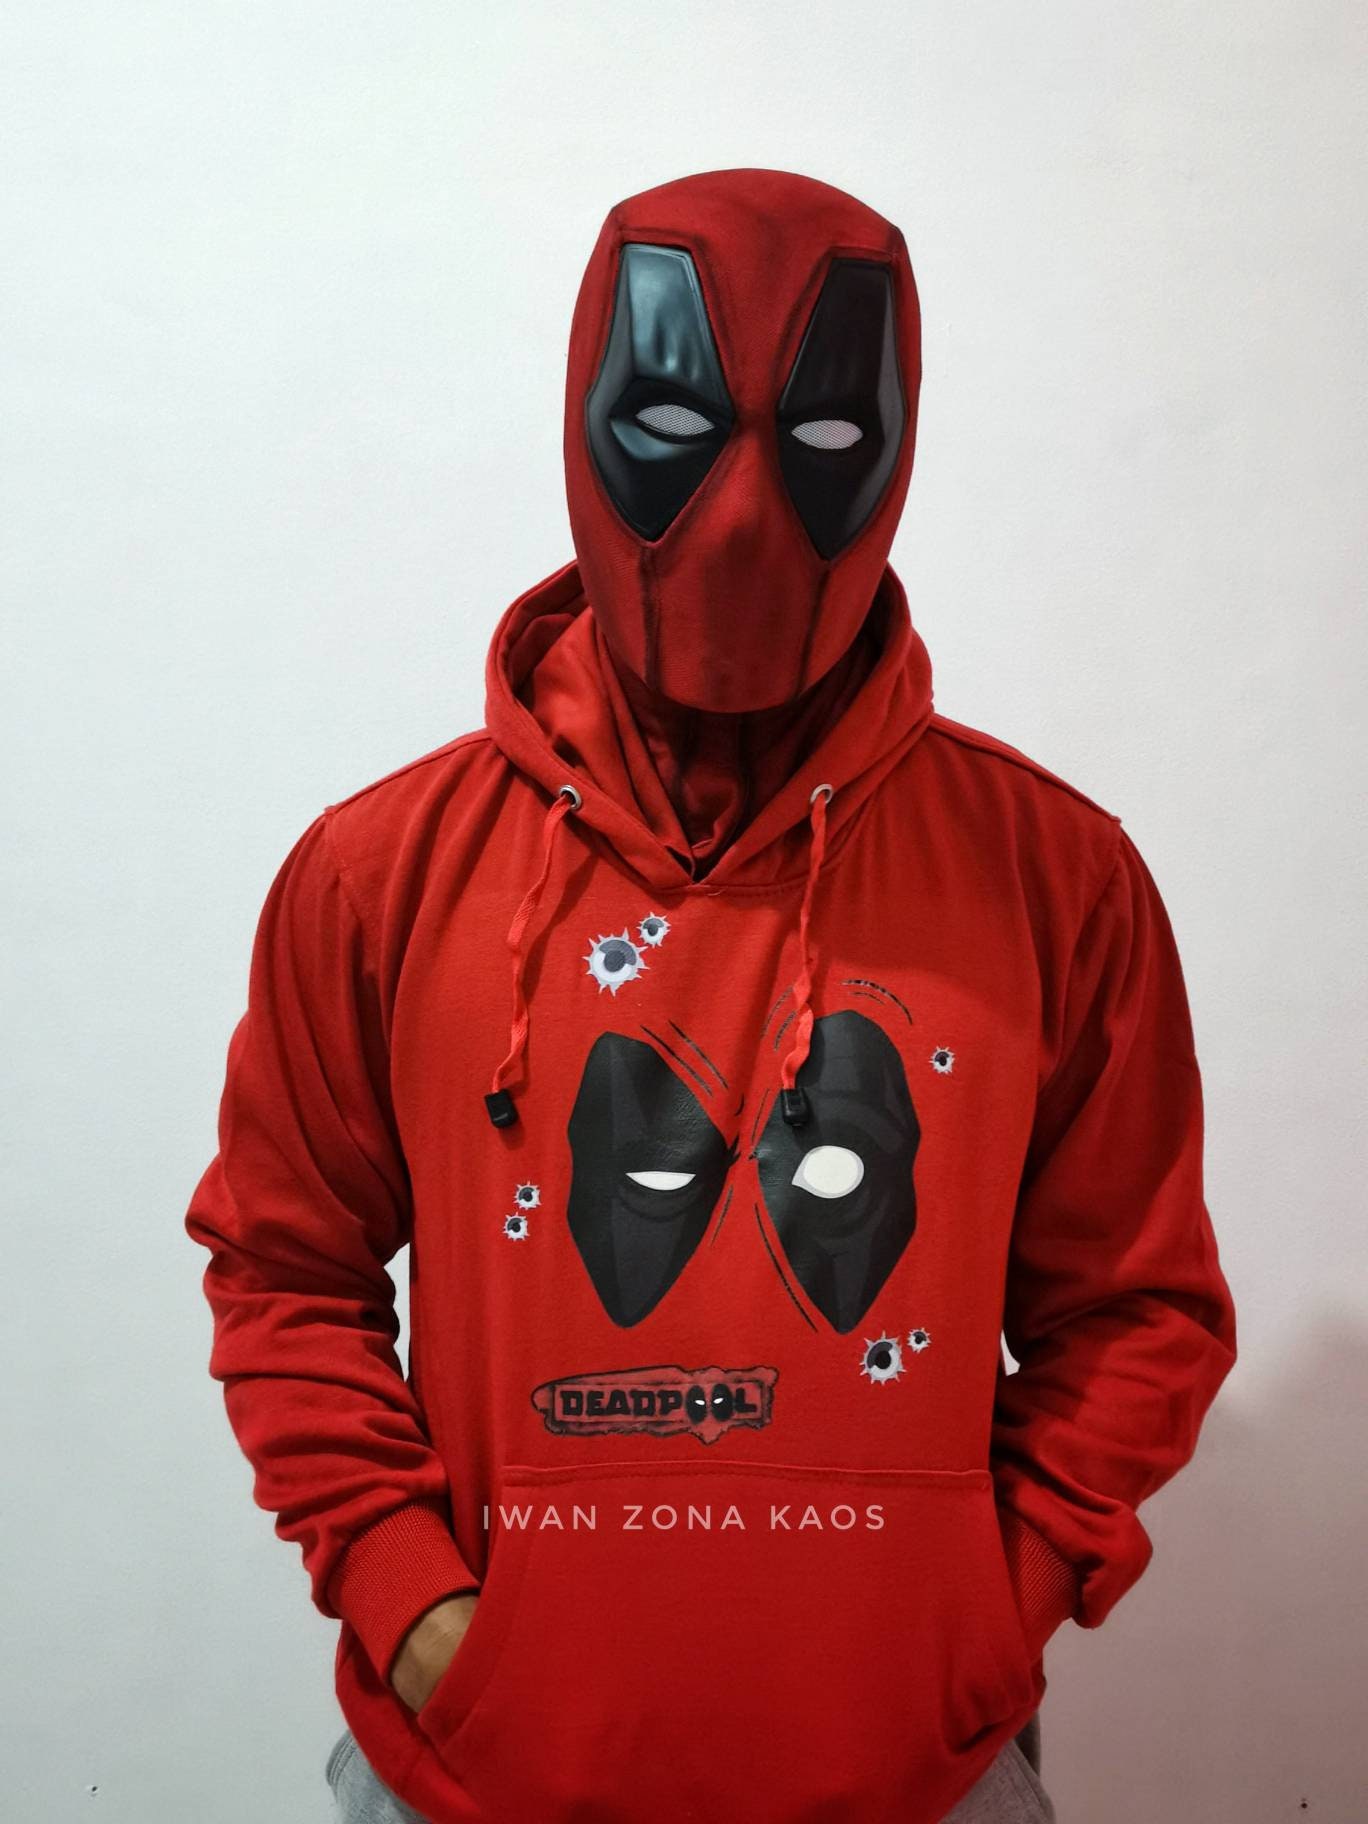 red and black deadpool costume